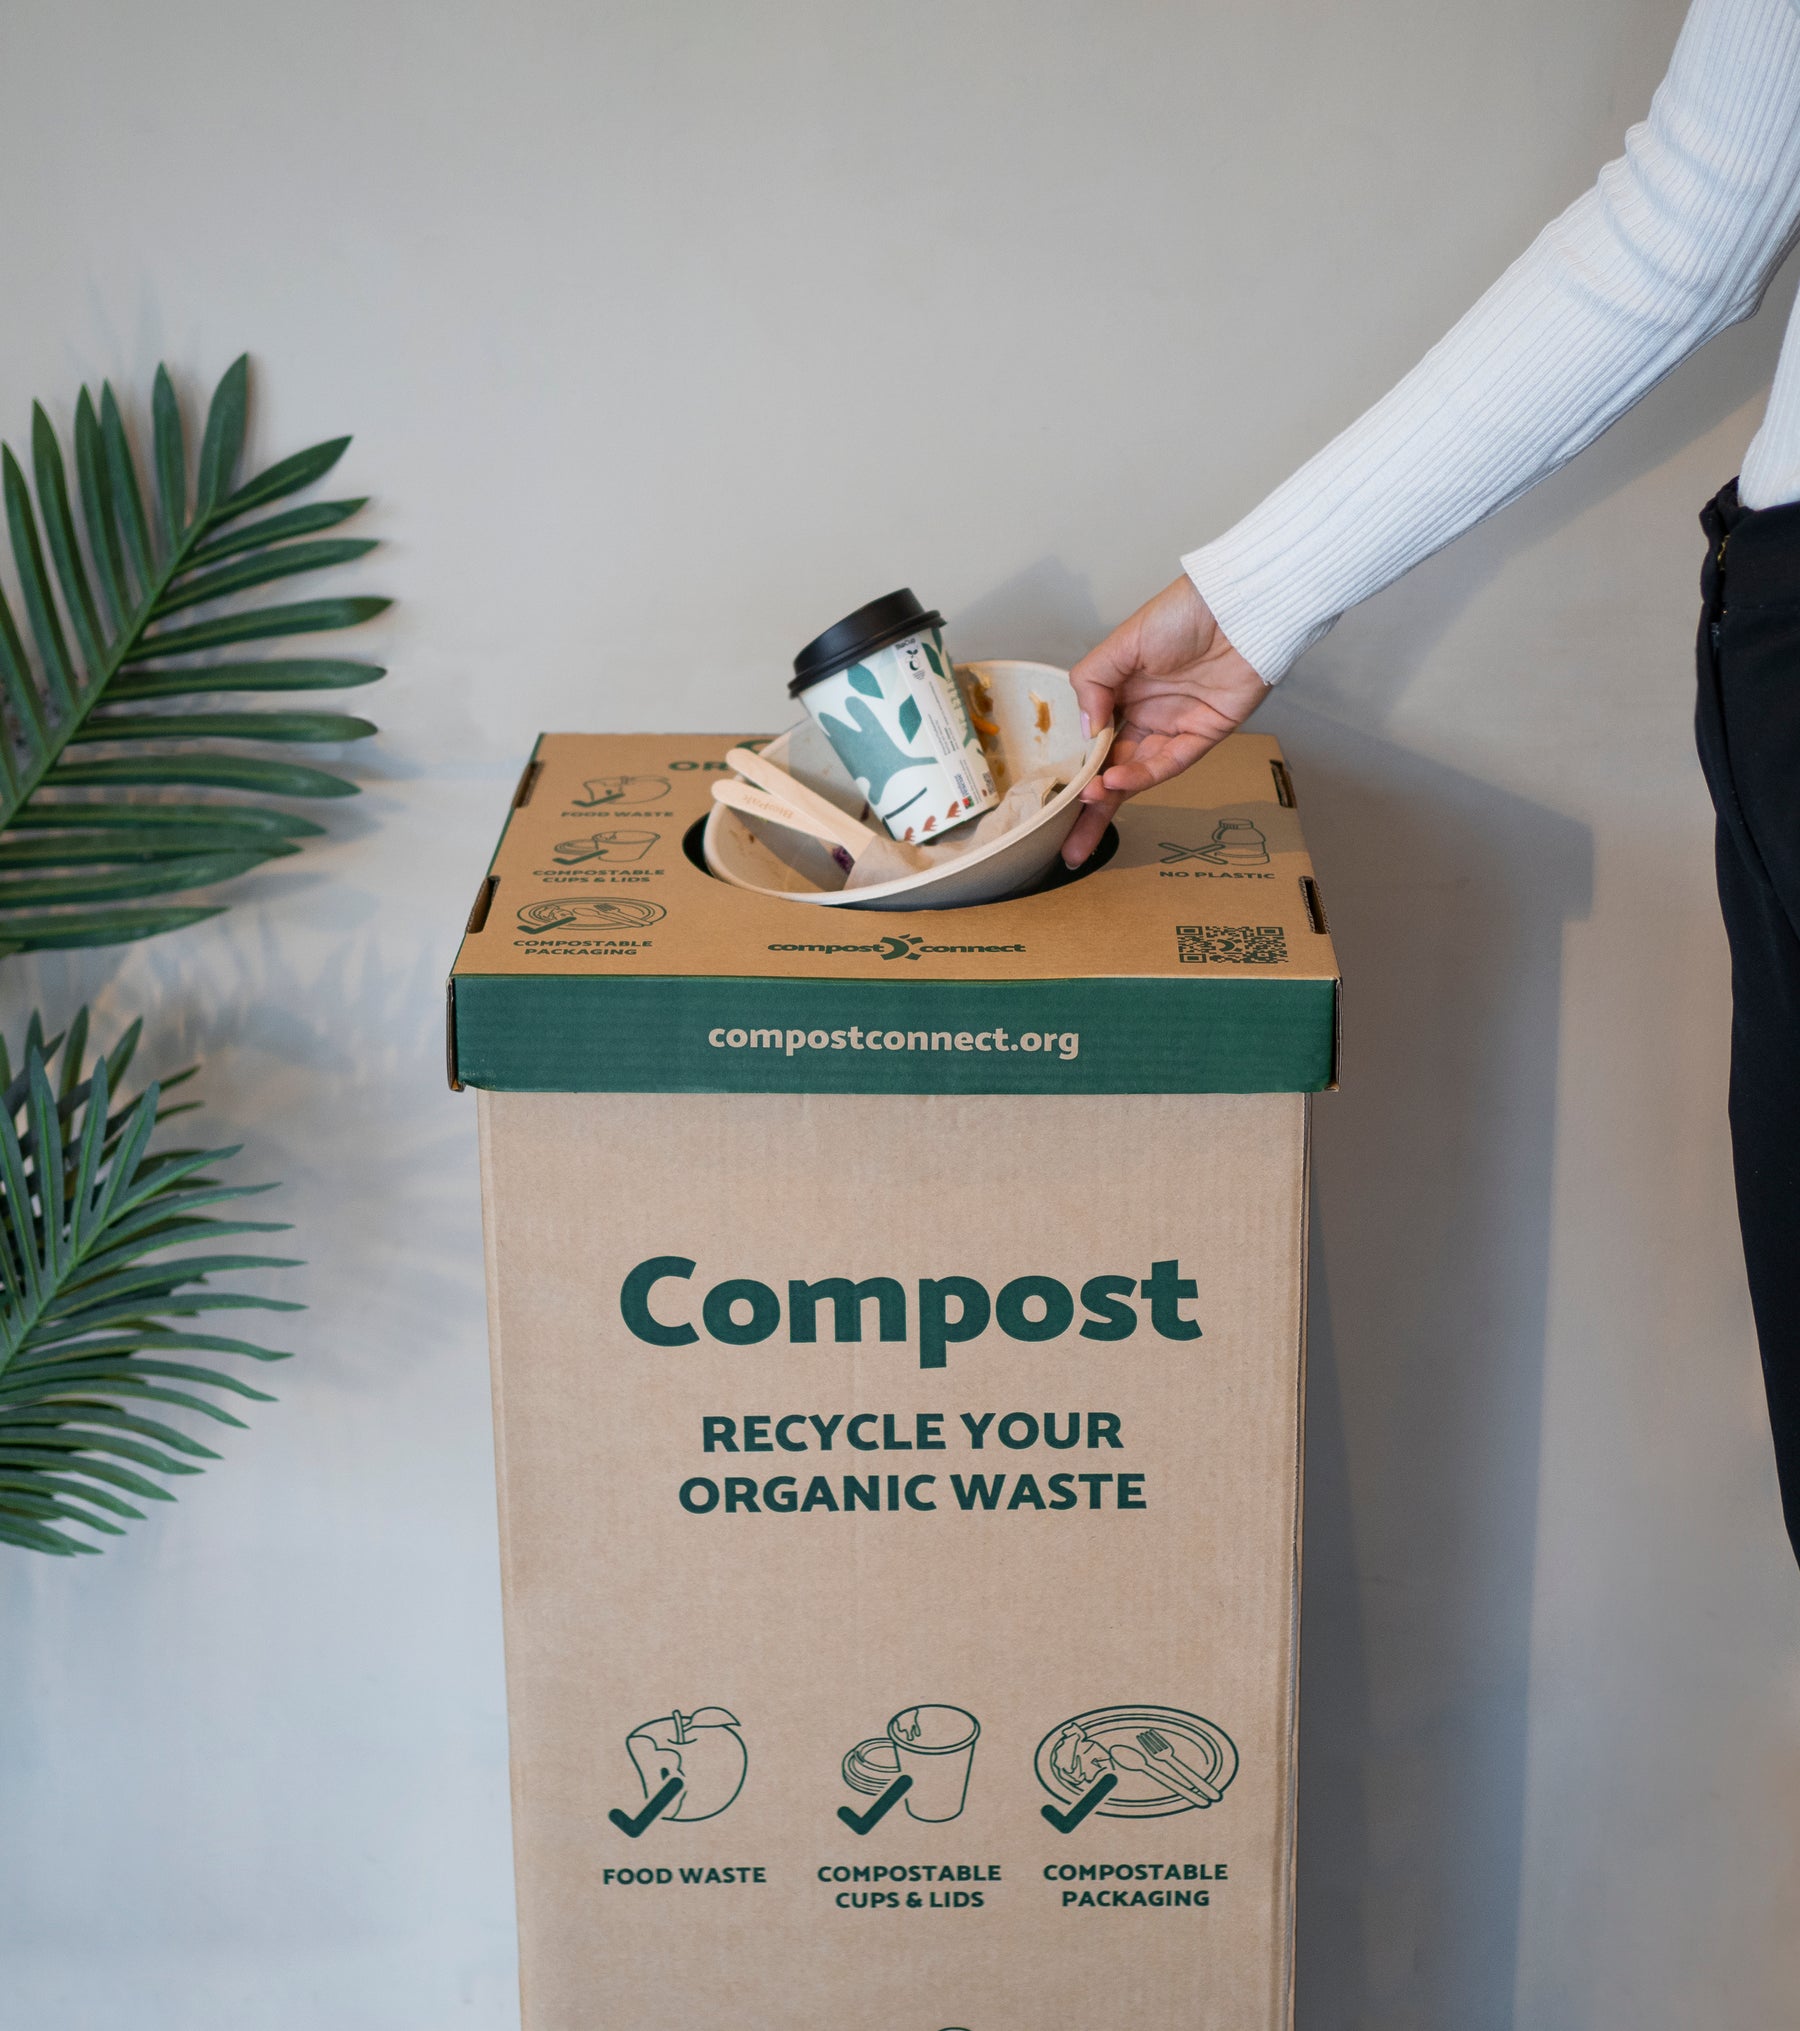 Compost Connect - Transforming packaging and food waste into compost